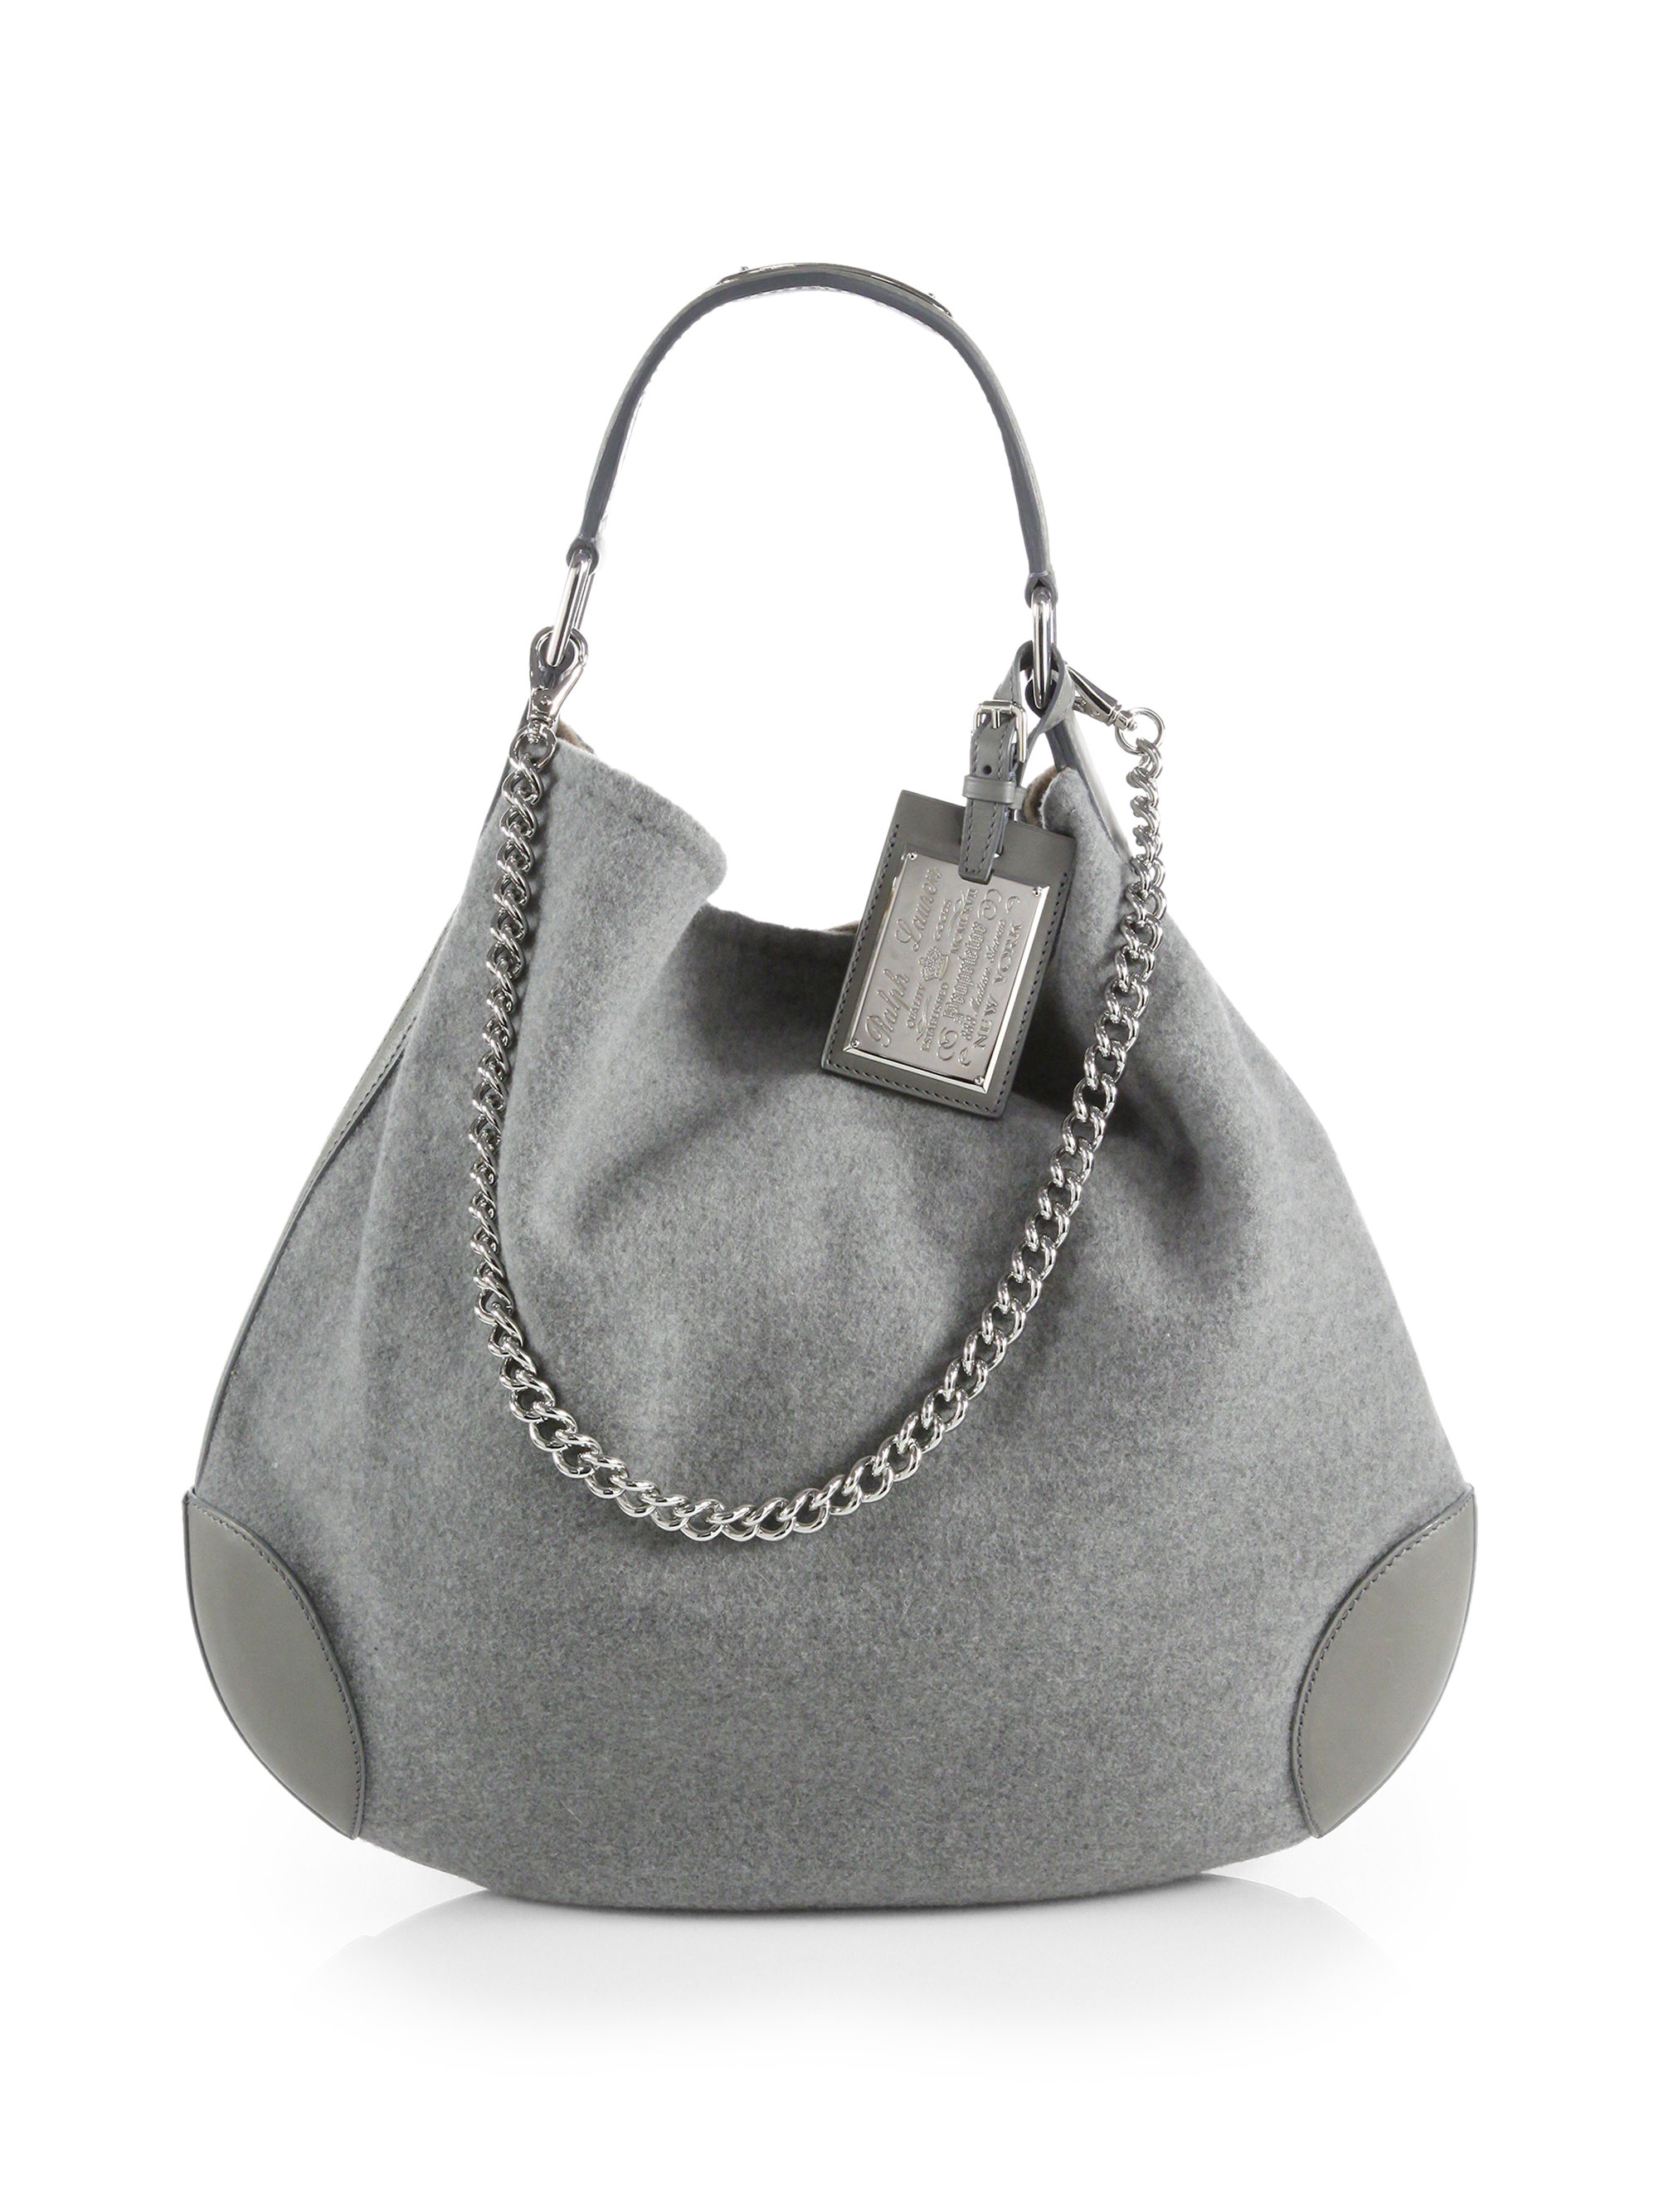 Ralph Lauren Collection Cashmere Leather Hobo Bag in Gray (GREY) | Lyst